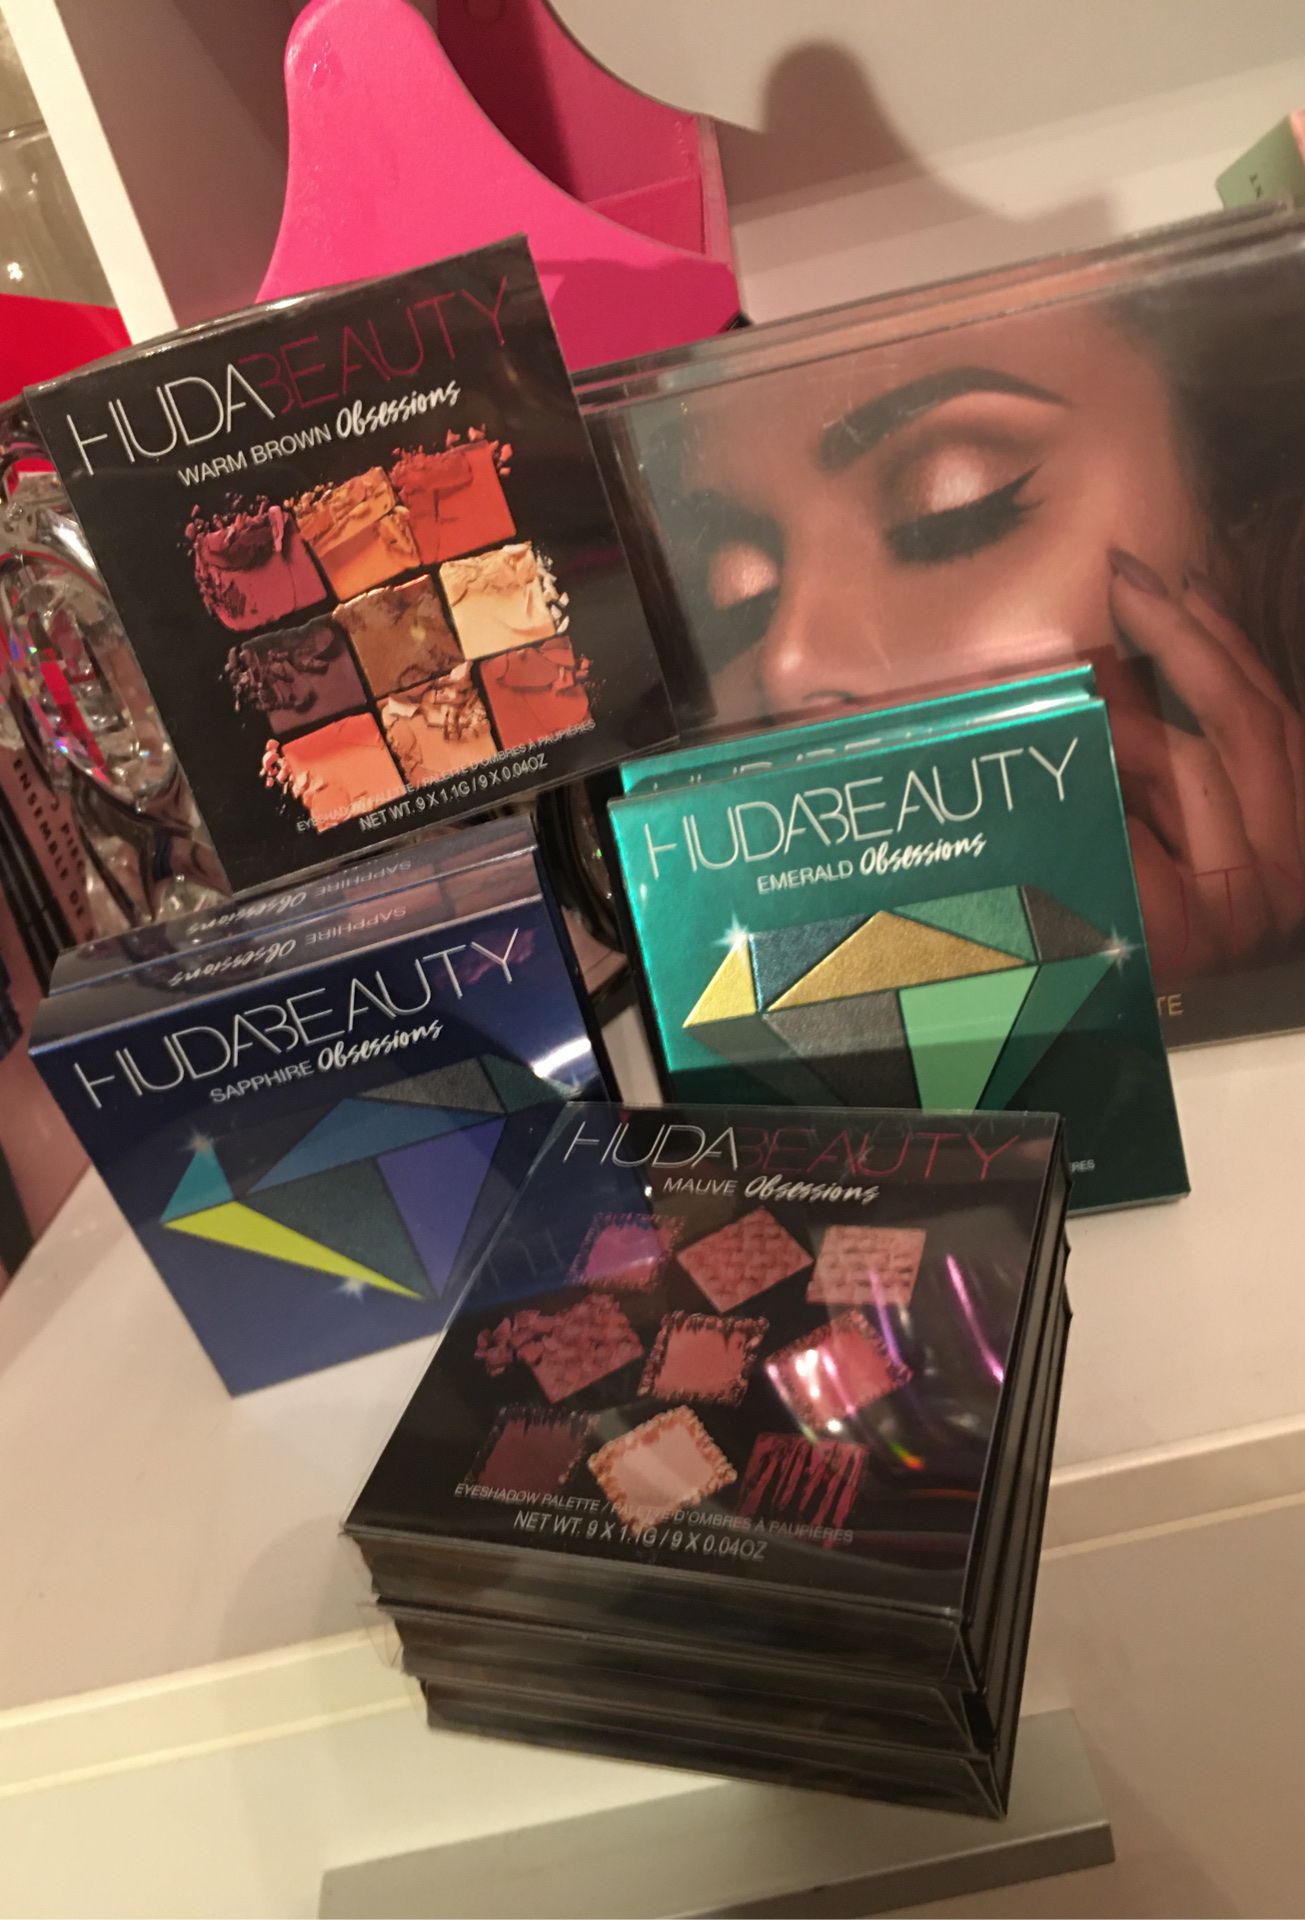 HUDA beauty obsessions & highlighter palettes